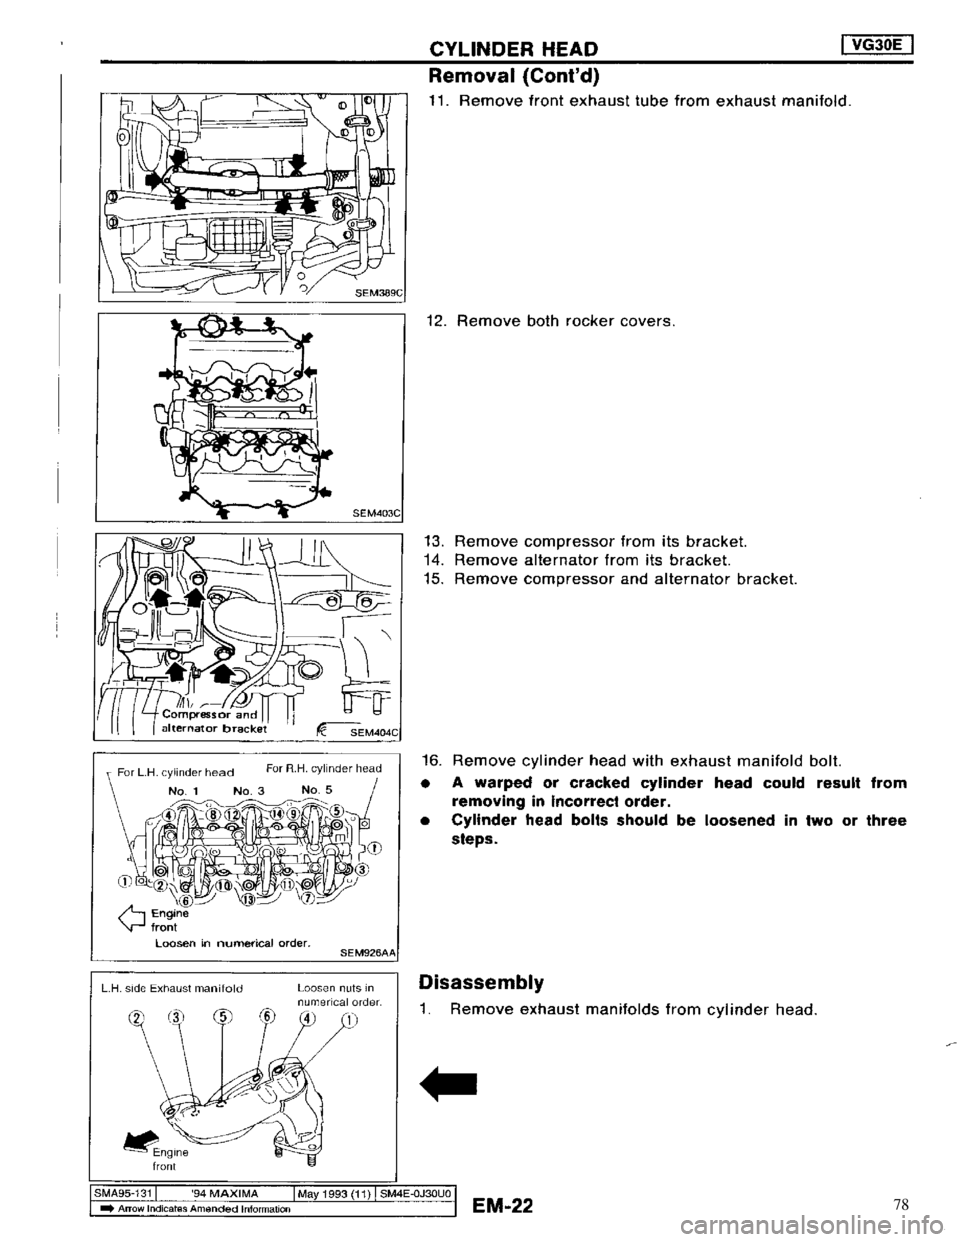 NISSAN MAXIMA 1994 A32 / 4.G Engine Mechanical Owners Manual 78 